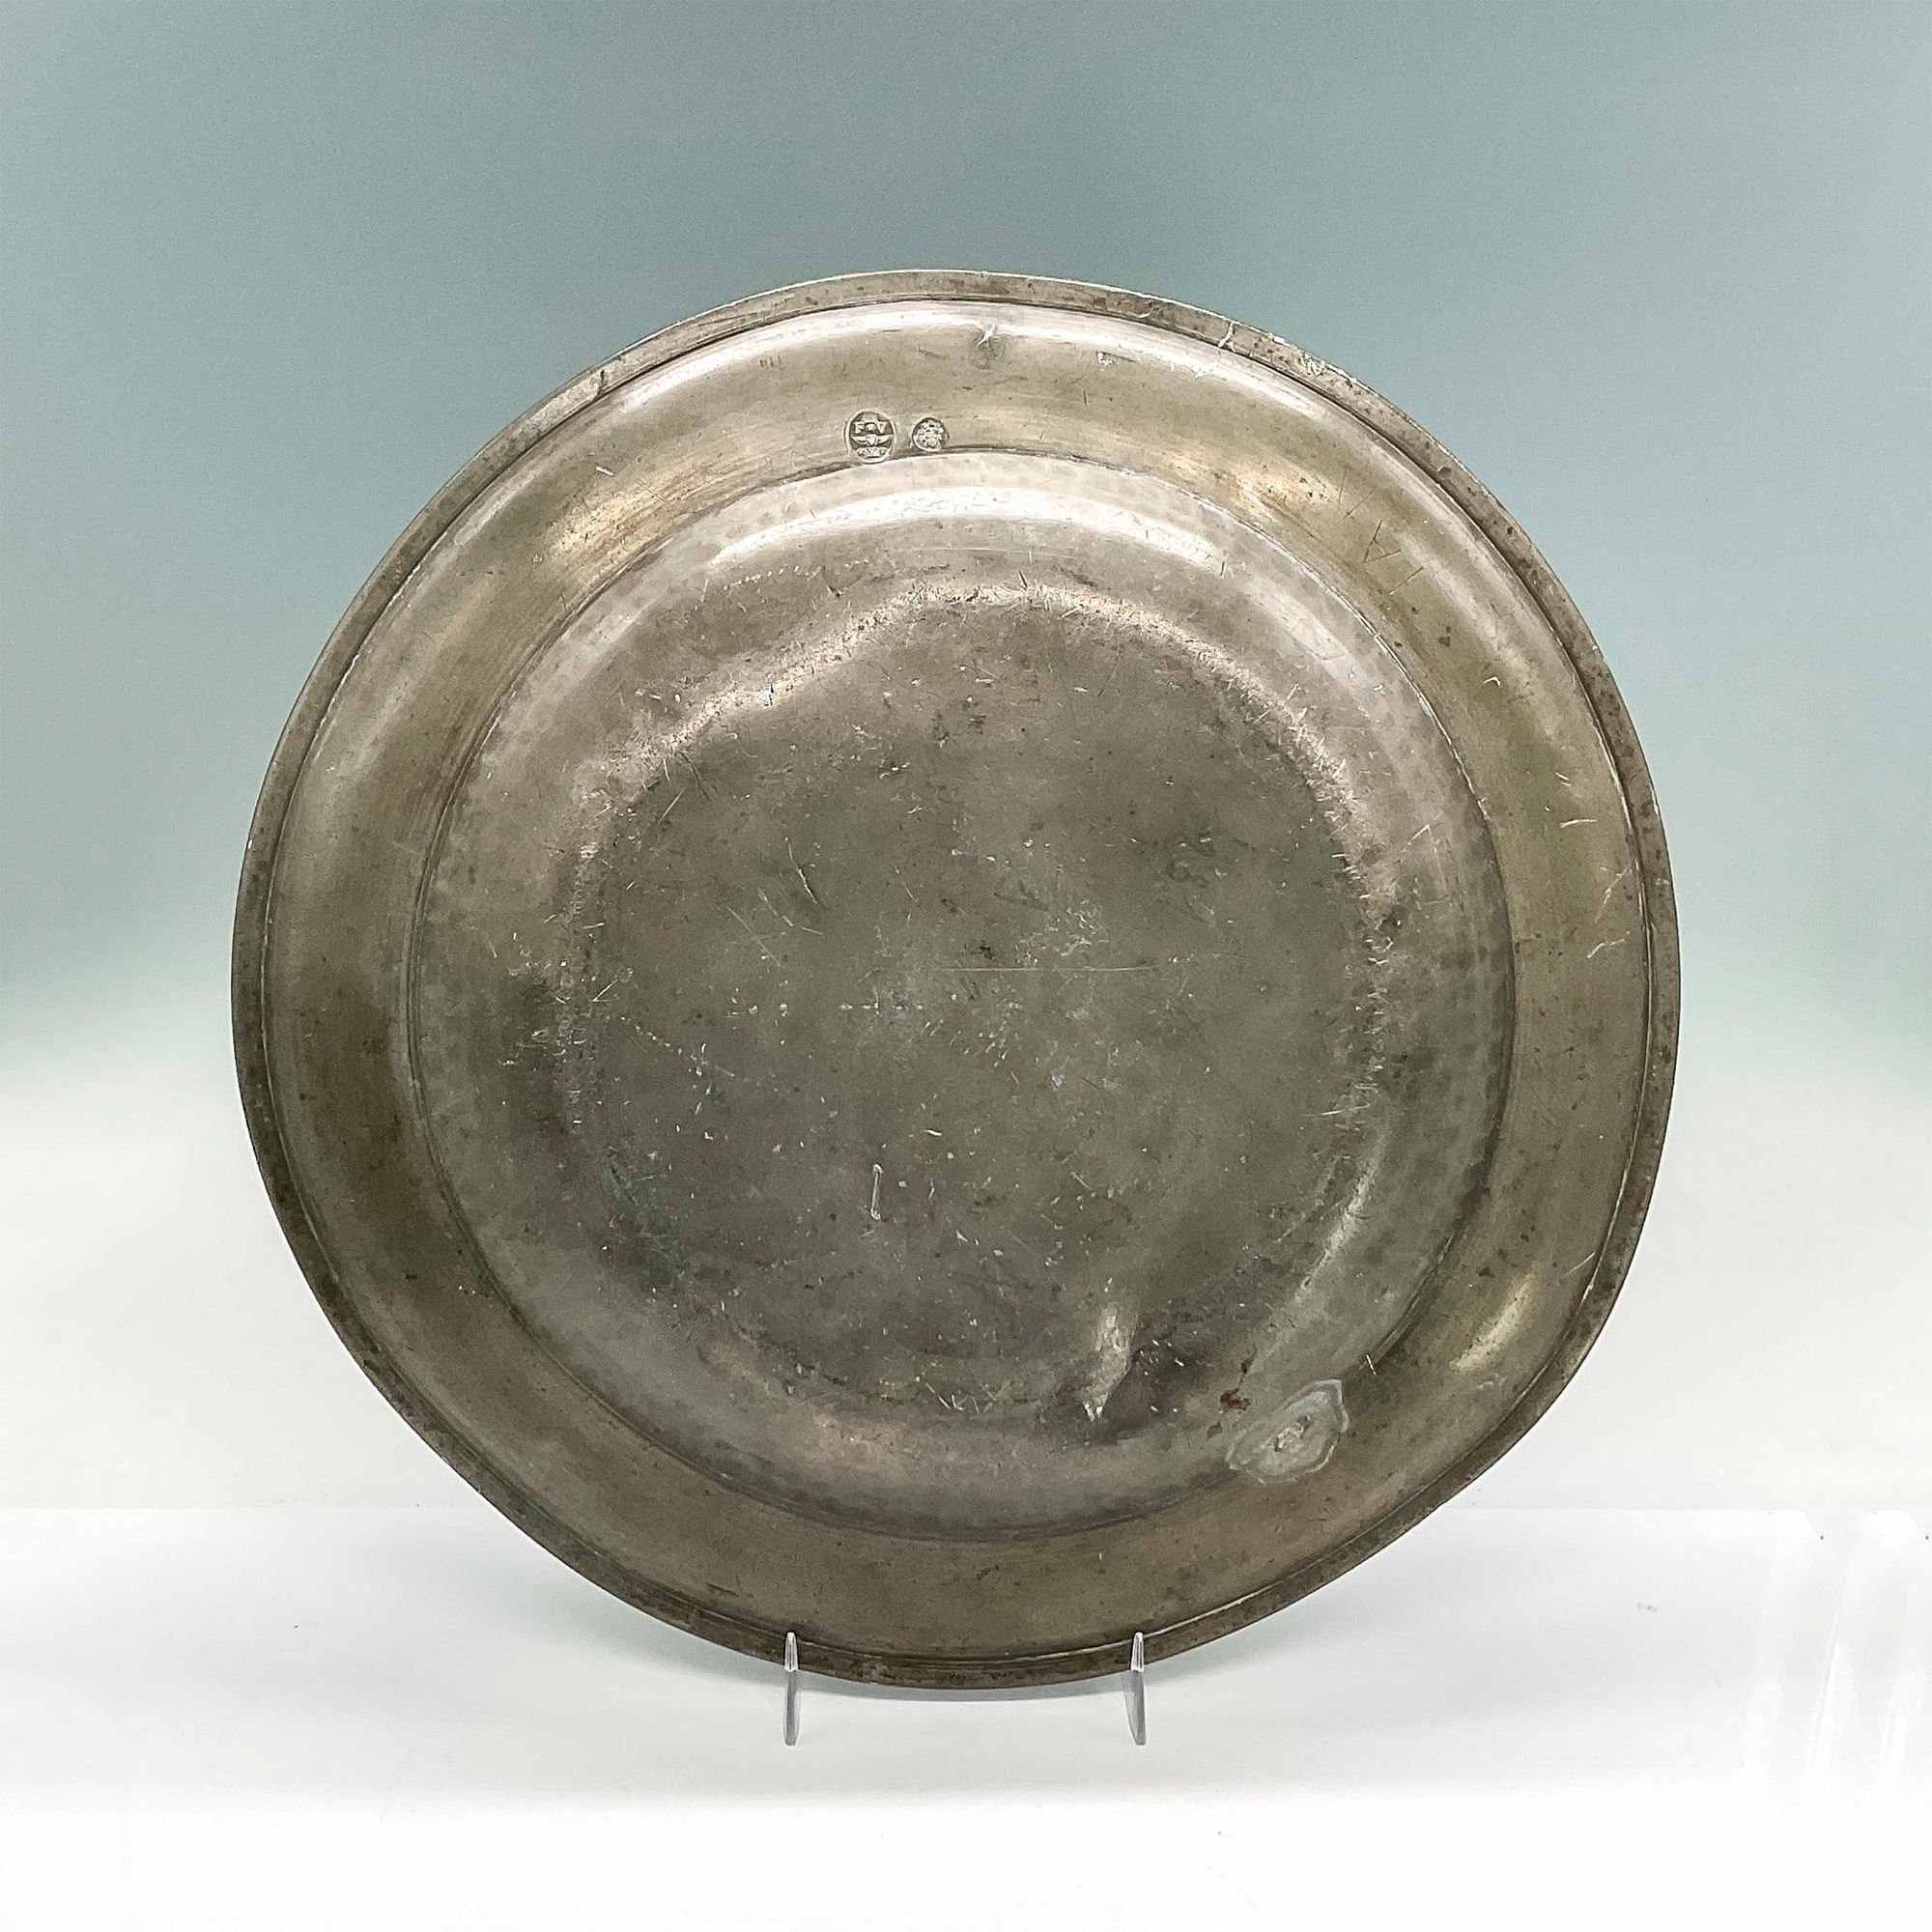 Antique Pewter Shallow Bowl - Image 2 of 3